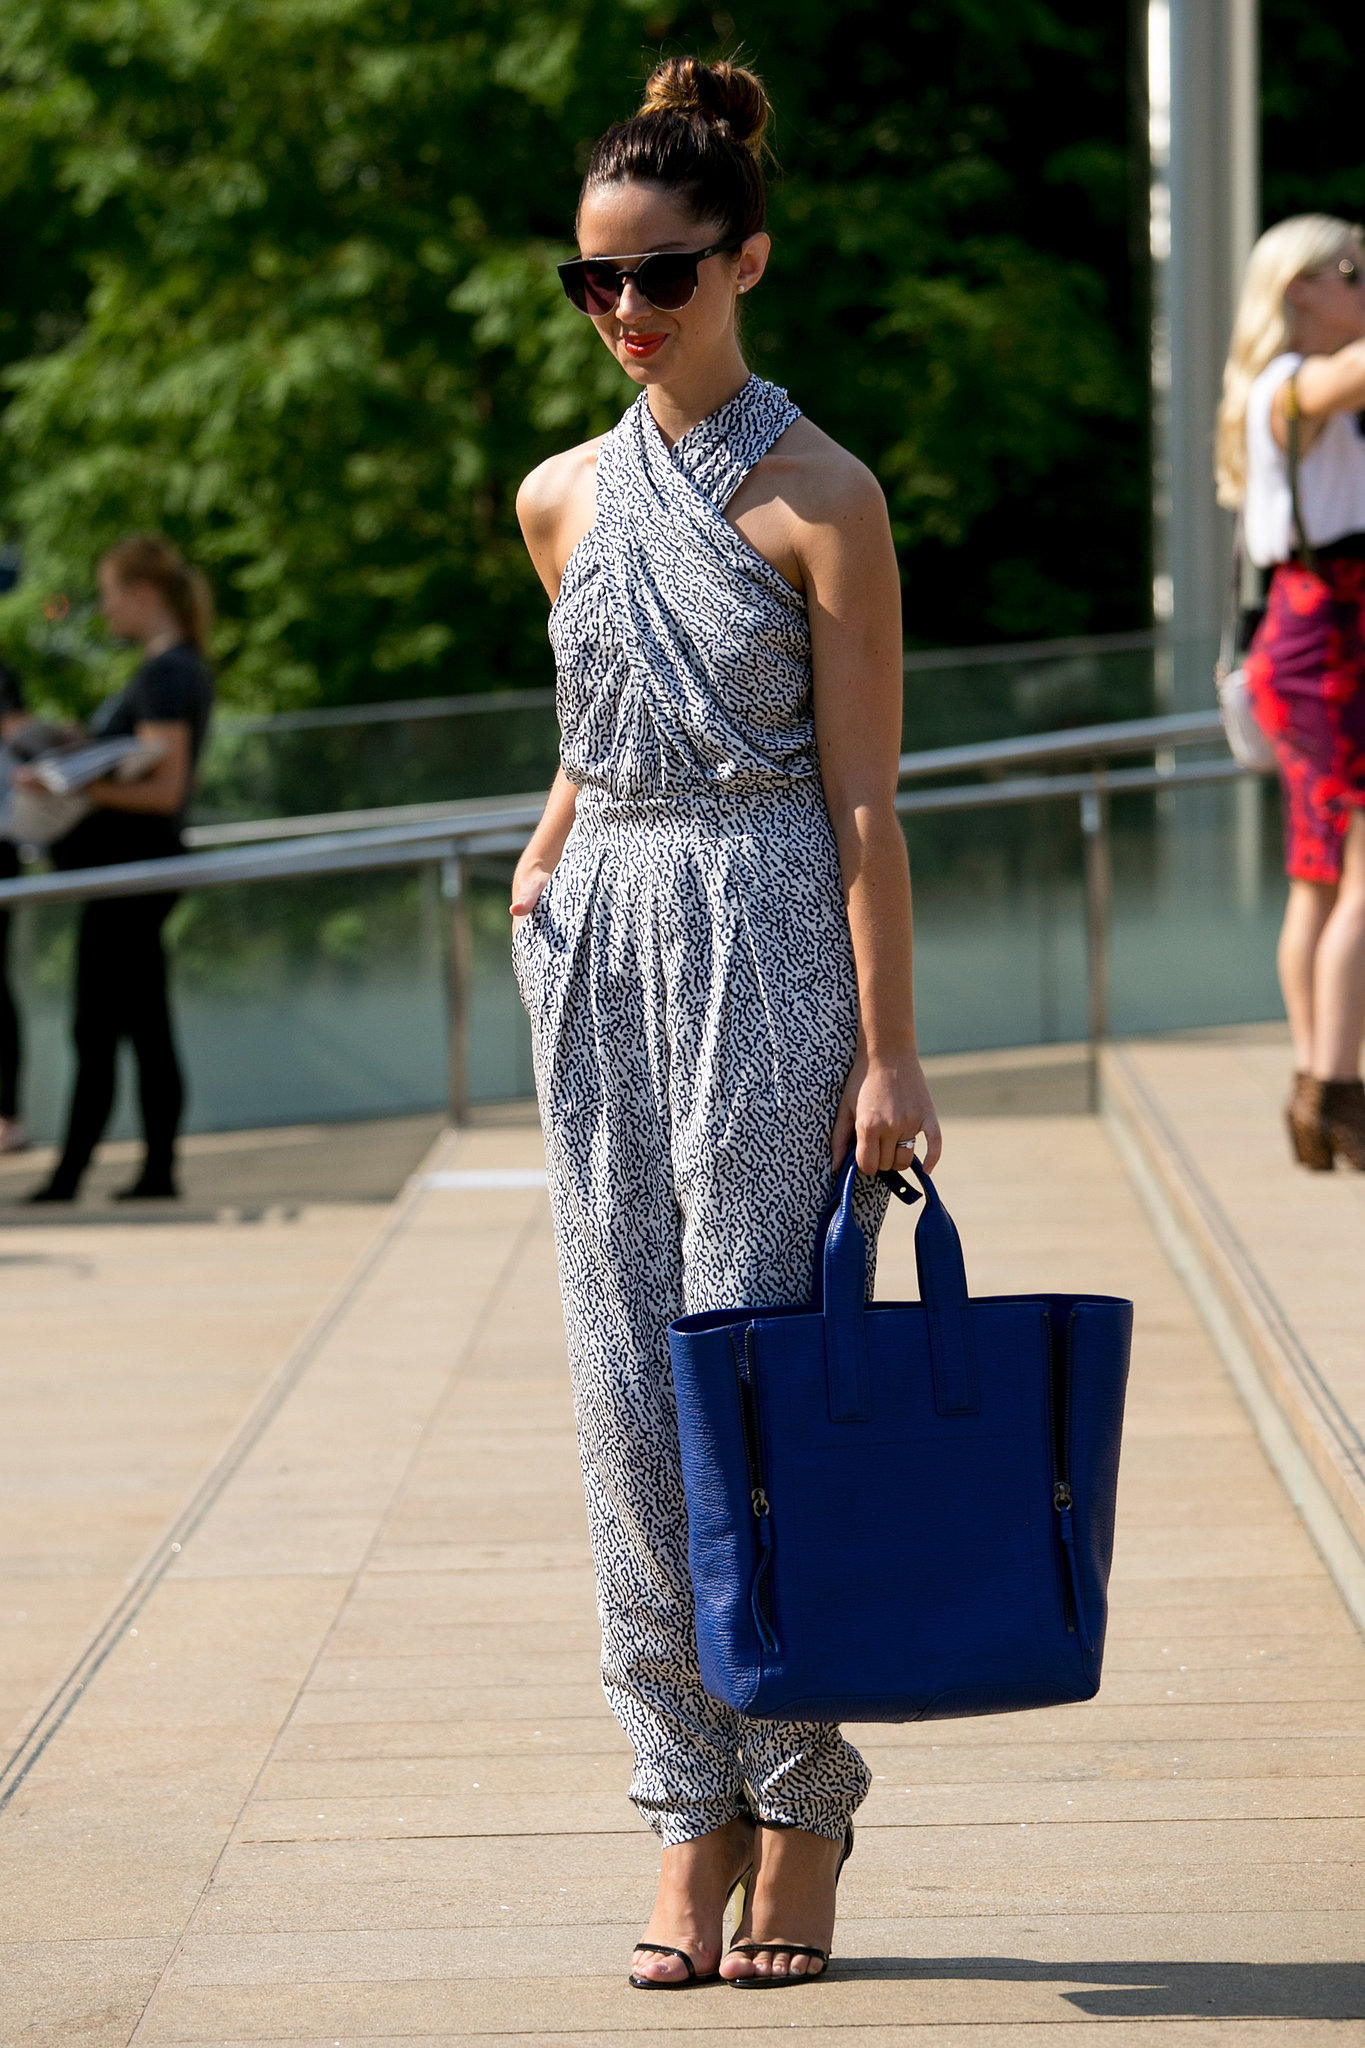 A sophisticated jumpsuit was a perfect way to beat the New York heat.
